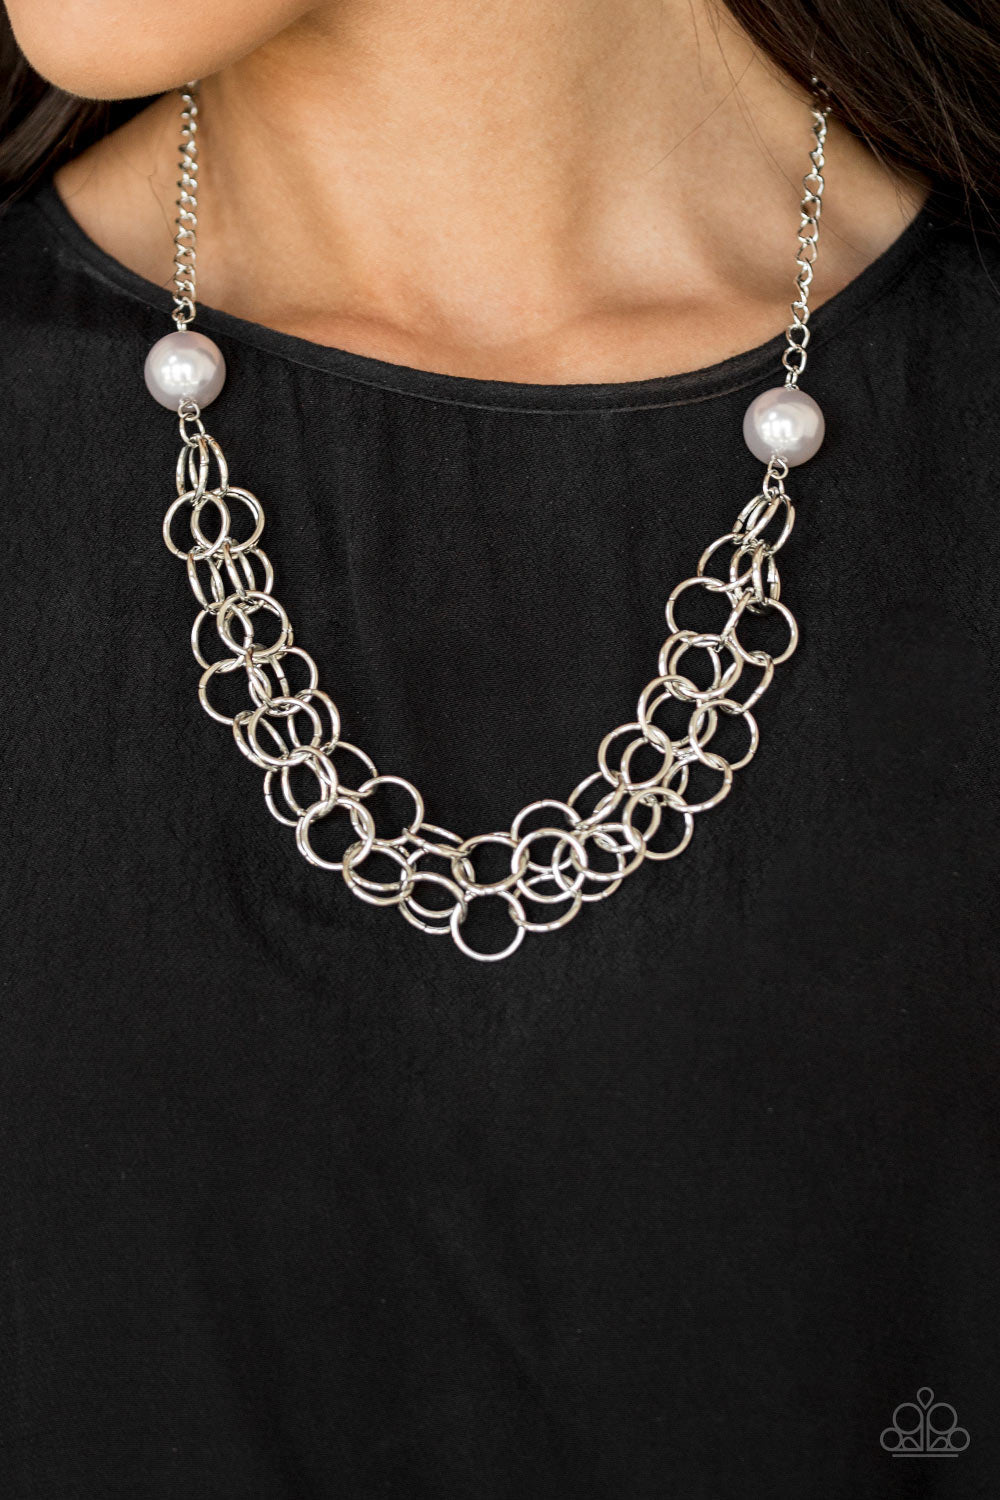 Daring Diva - Silver Pearl Fashion Necklace - Paparazzi Accessories - Two oversized silver pearls give way to dramatic silver chains, creating bold layers below the collar for a sassy look. Features an adjustable clasp closure.